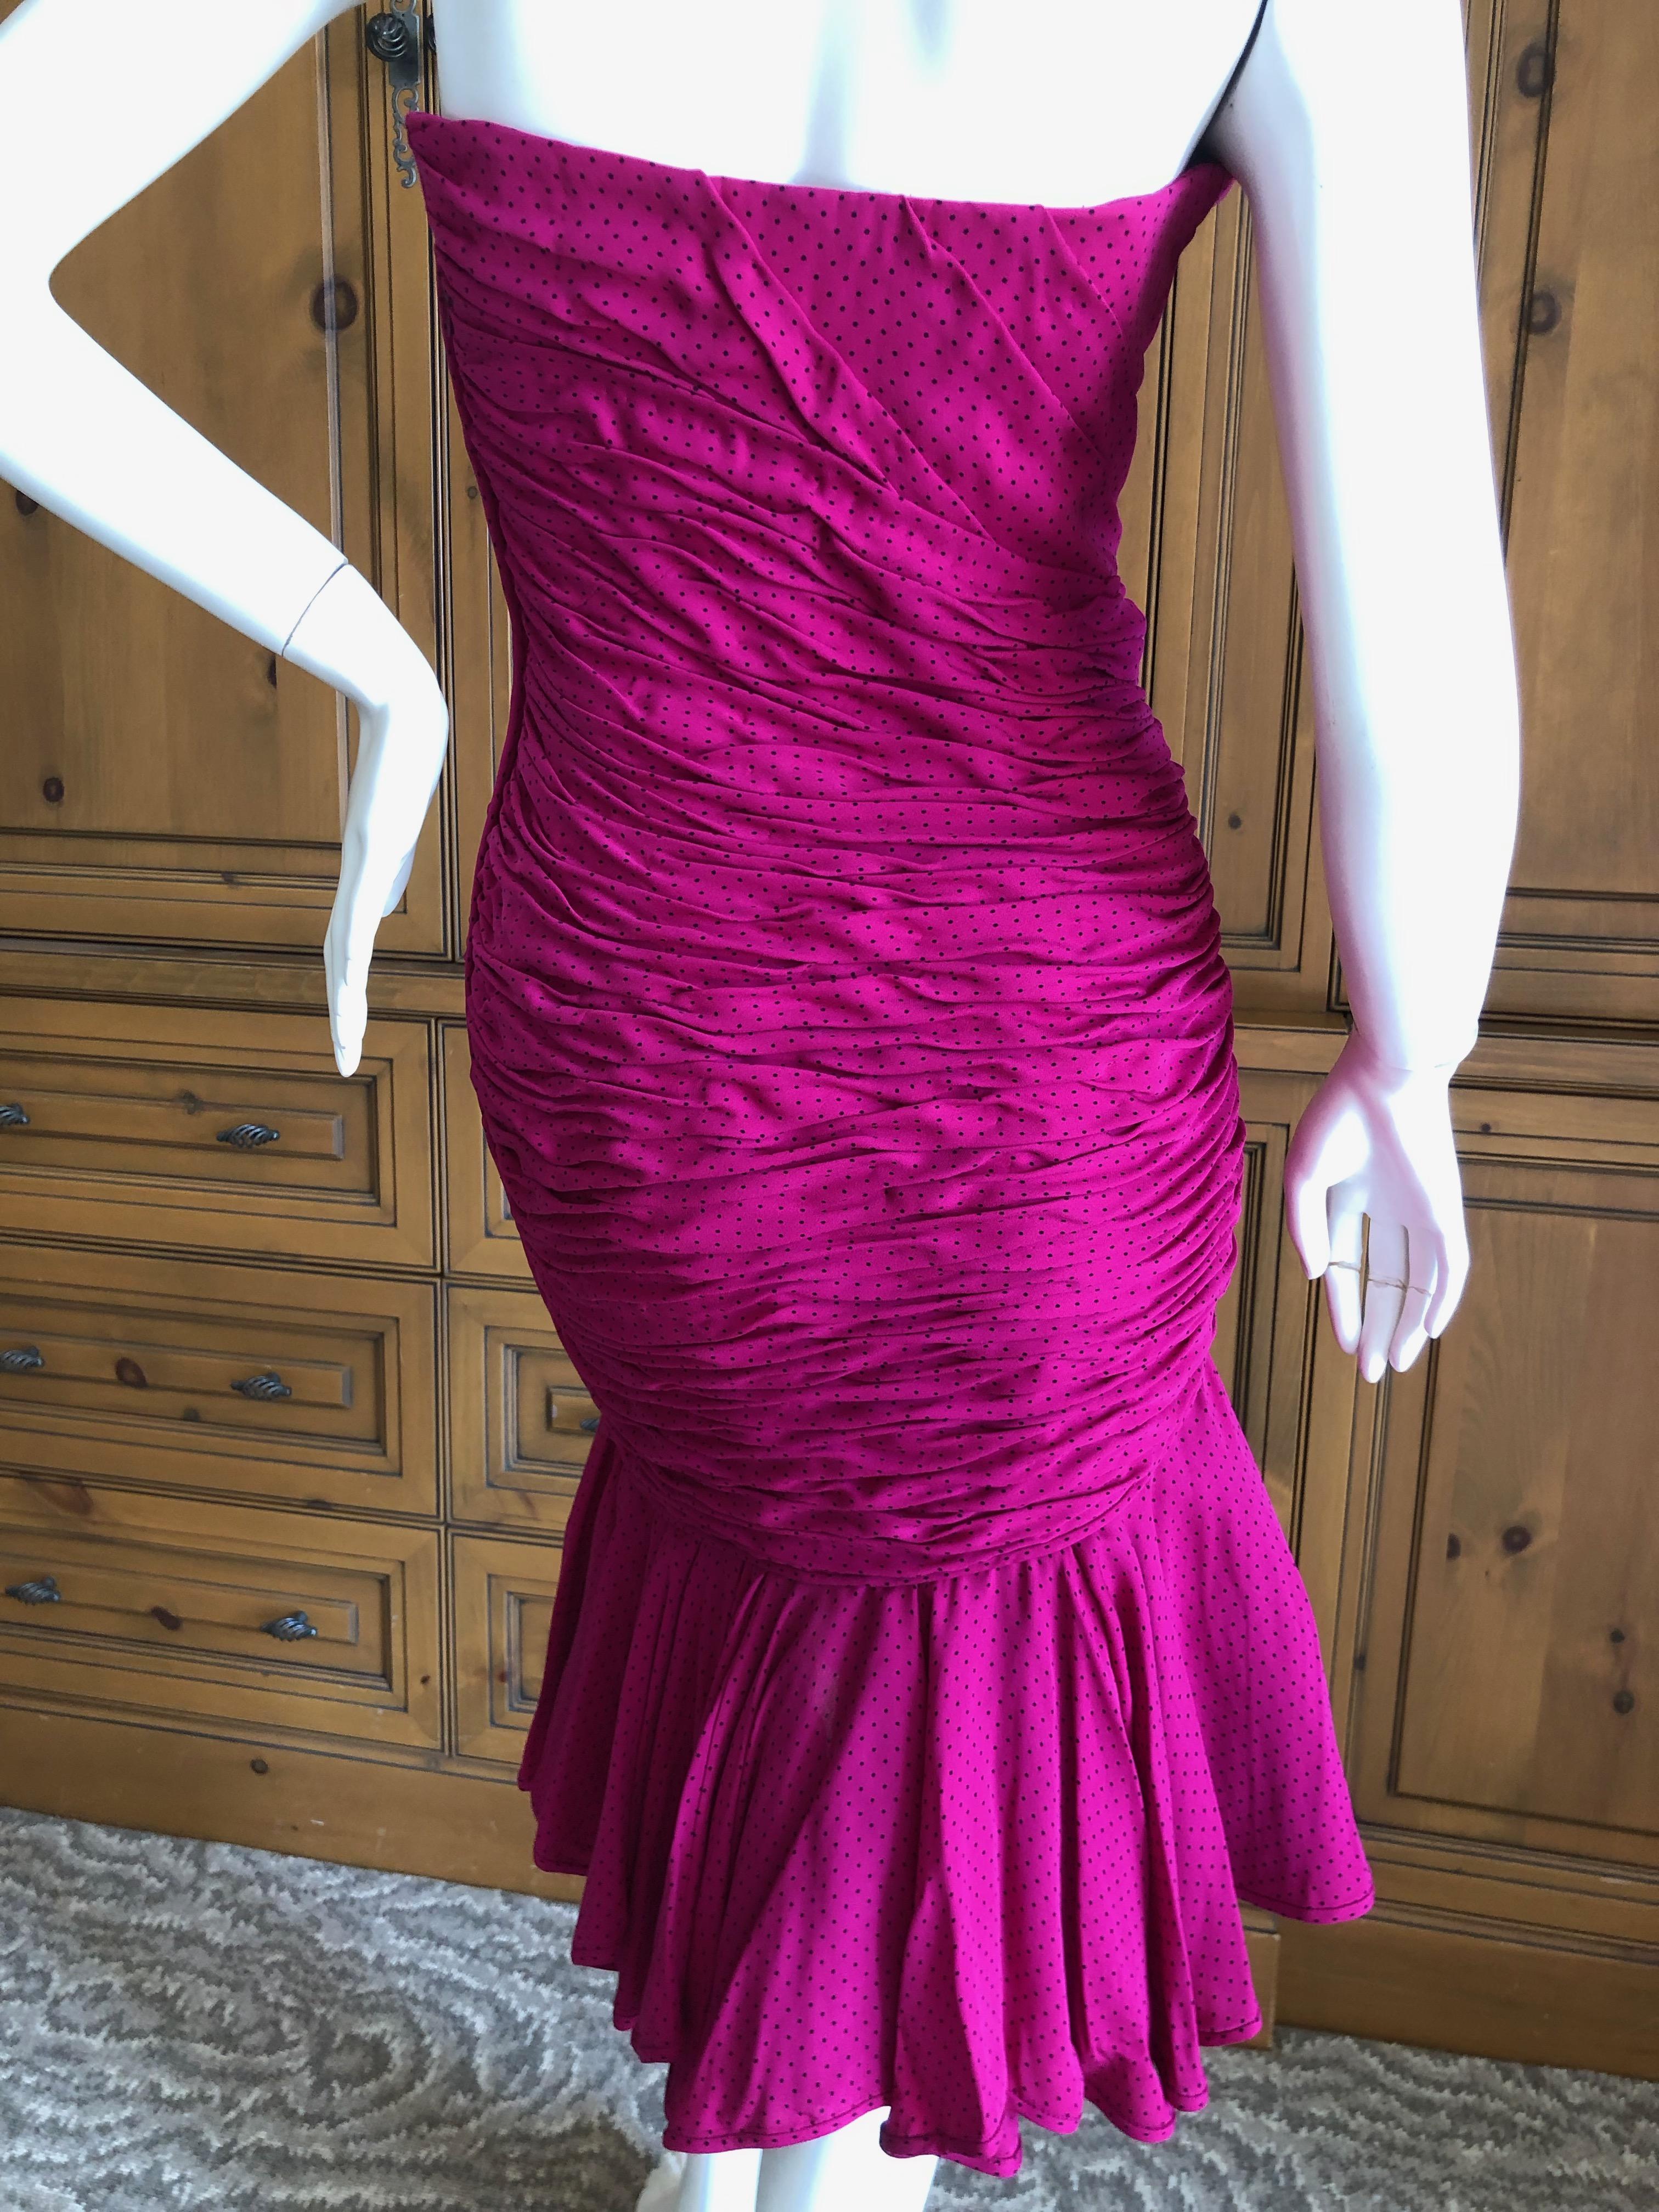 Emanuel Ungaro Parallel Fall 1984 Shirred Strapless Evening Dress w Lace Hem For Sale 2